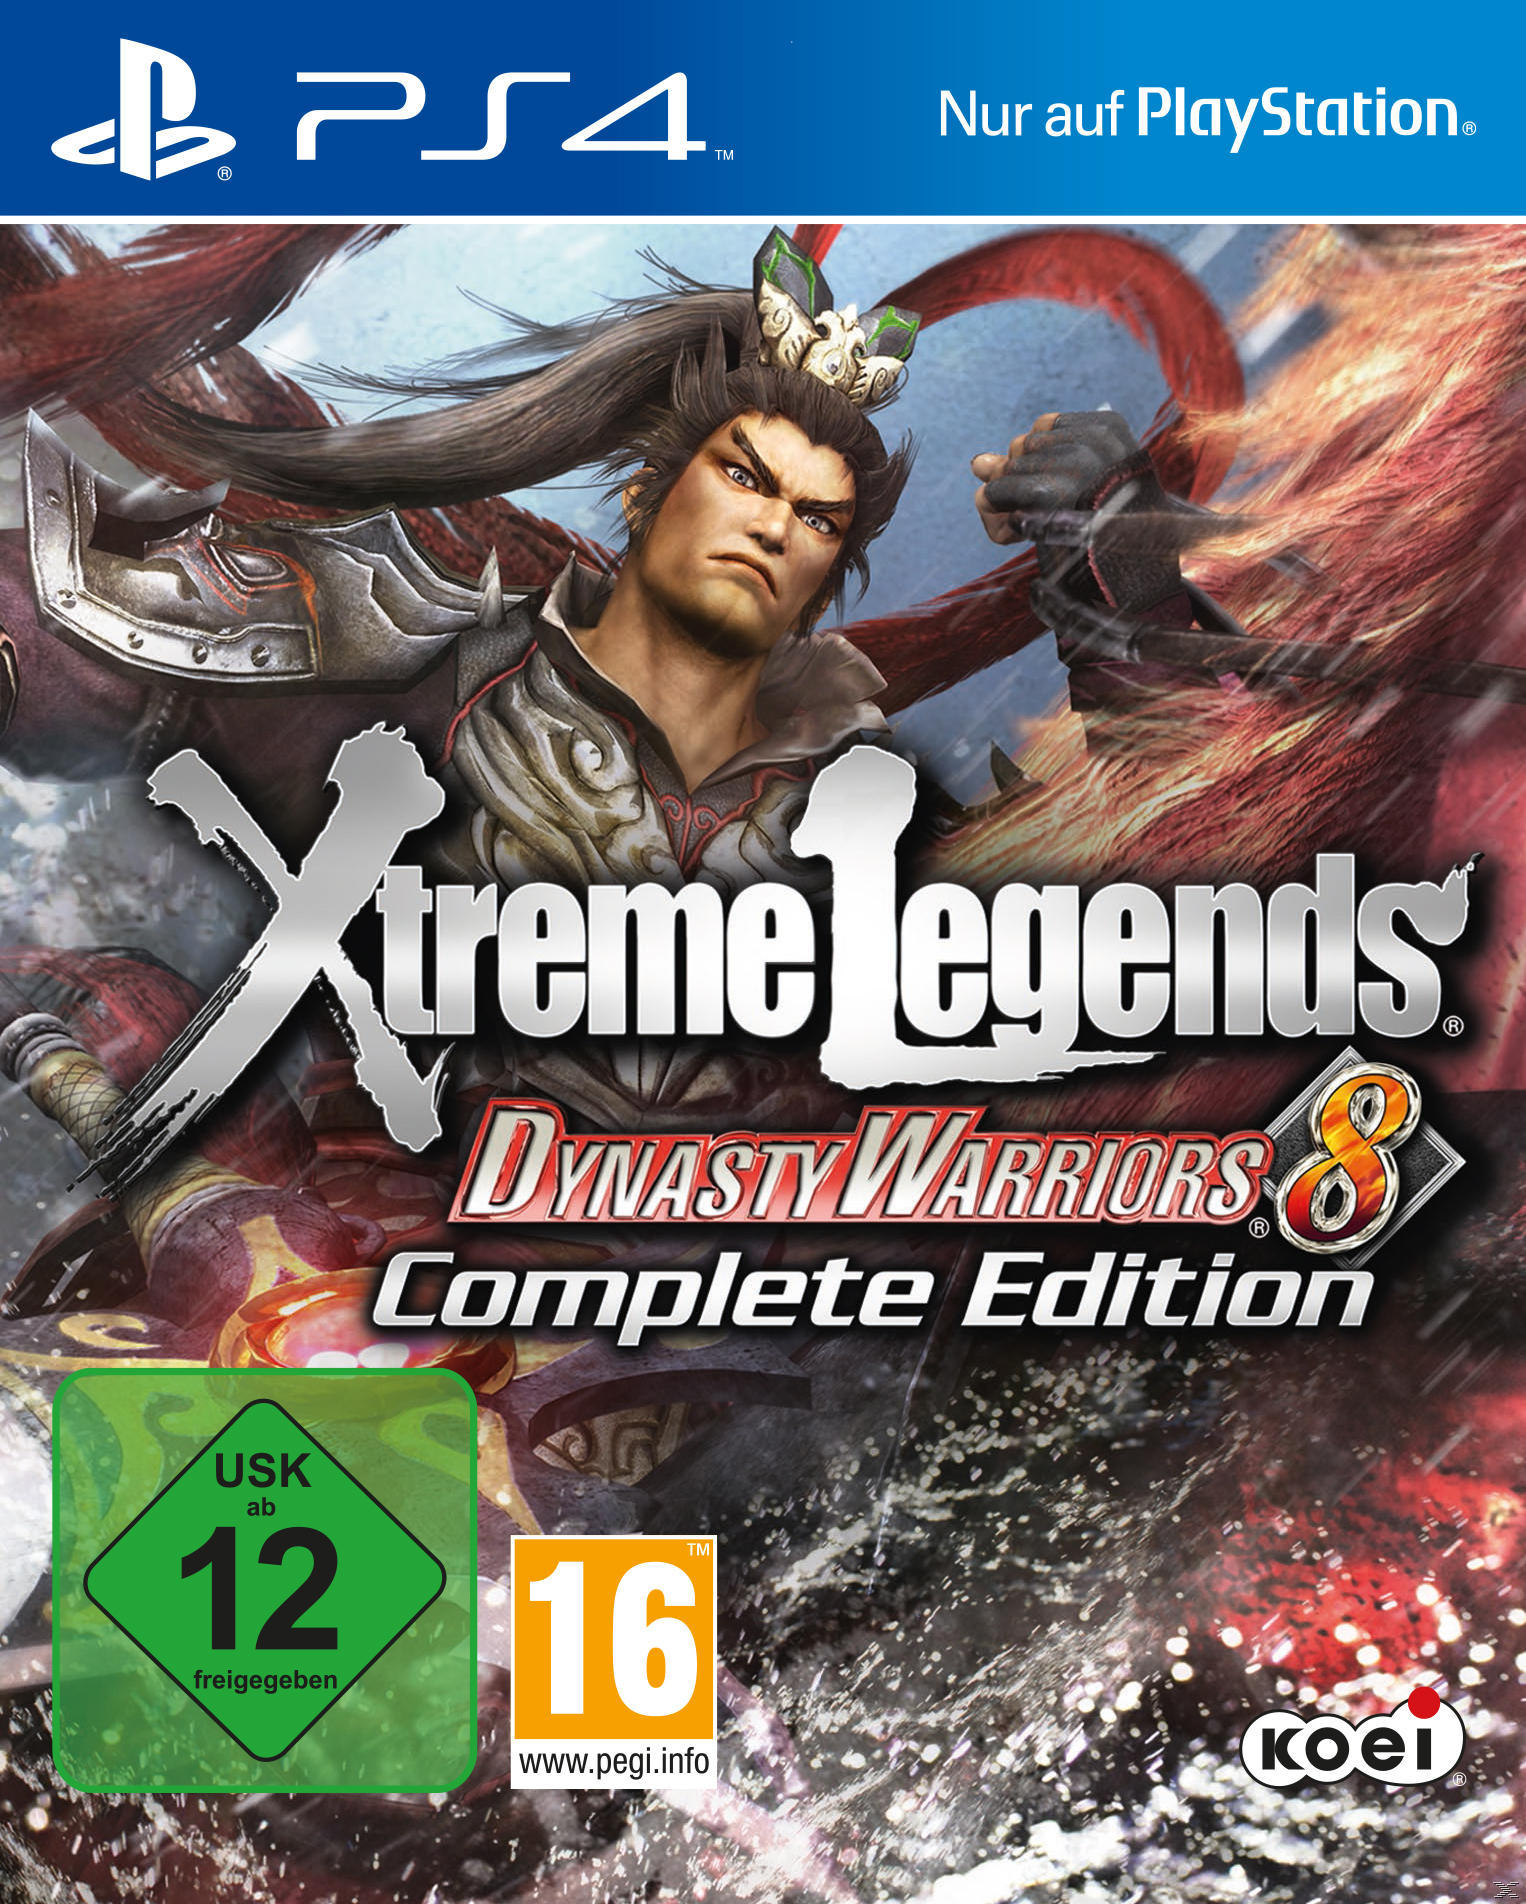 Edition Legends 4] 8: Complete Dynasty Warriors Xtreme - [PlayStation